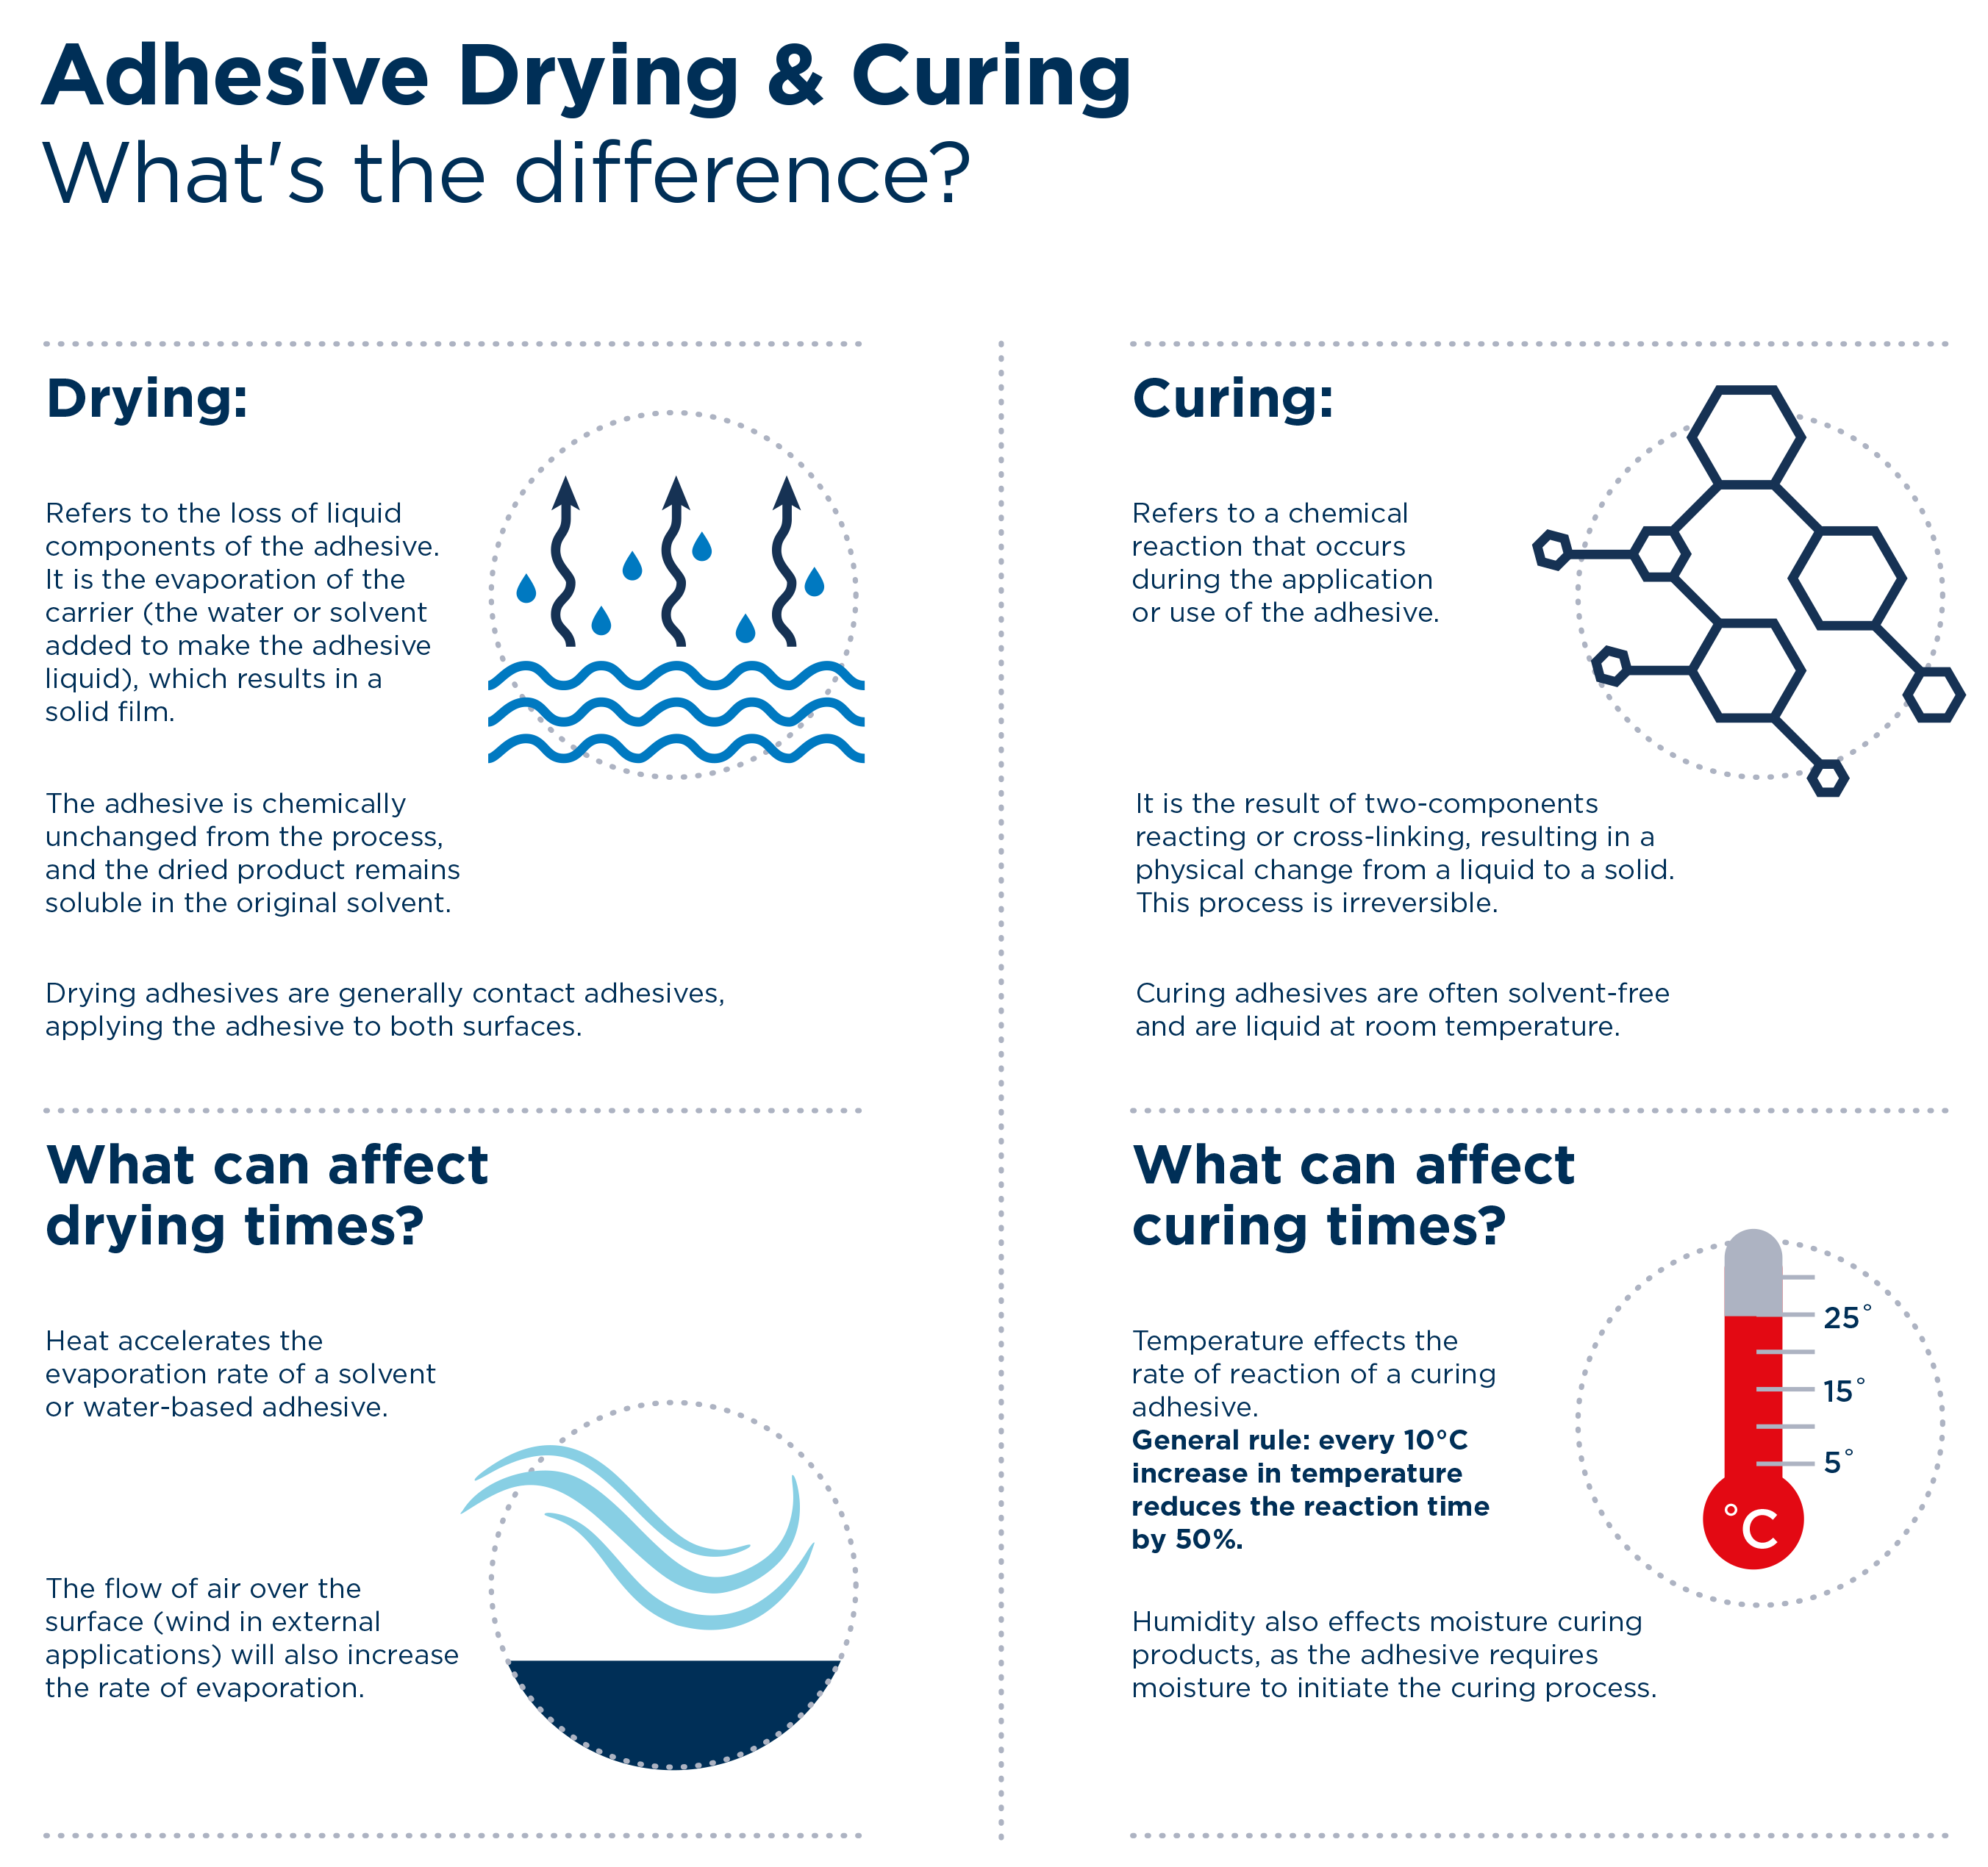 Adhesive drying vs curing infographic